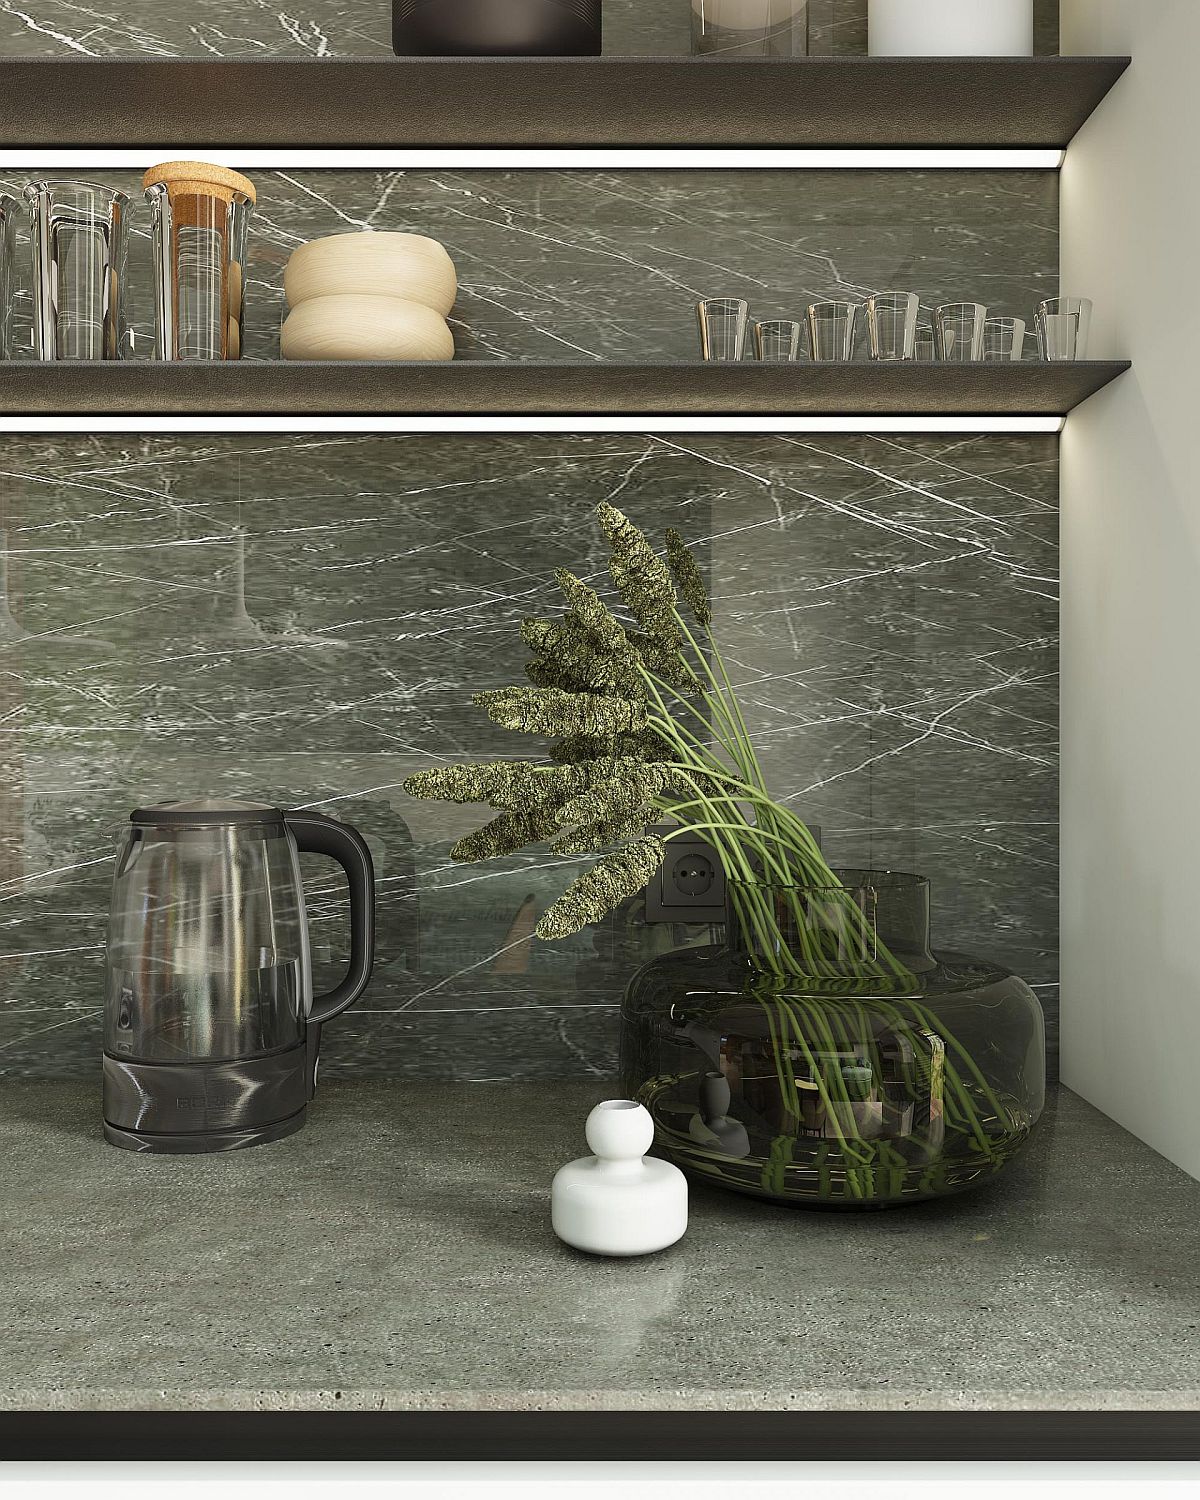 Stone-bakcplash-countertops-and-slim-floating-shelves-with-LED-strip-lights-for-the-modern-kitchen-66335